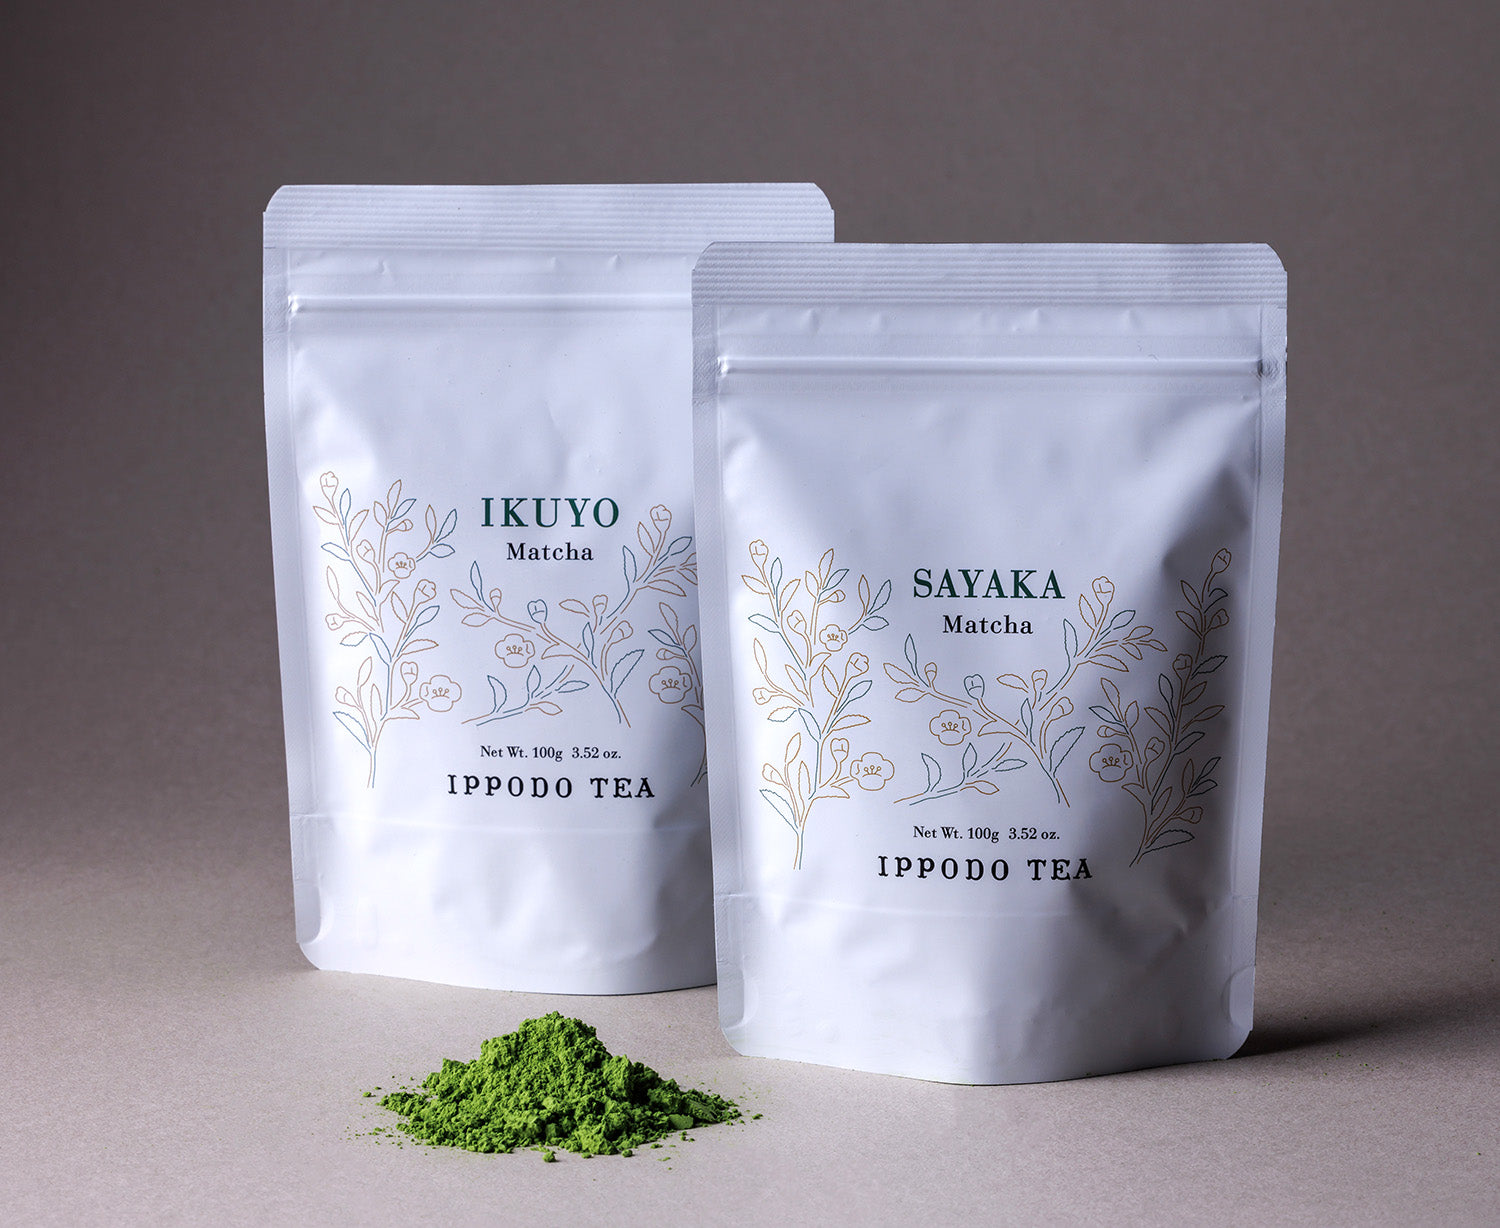 Now Available: Matcha 100g Bags